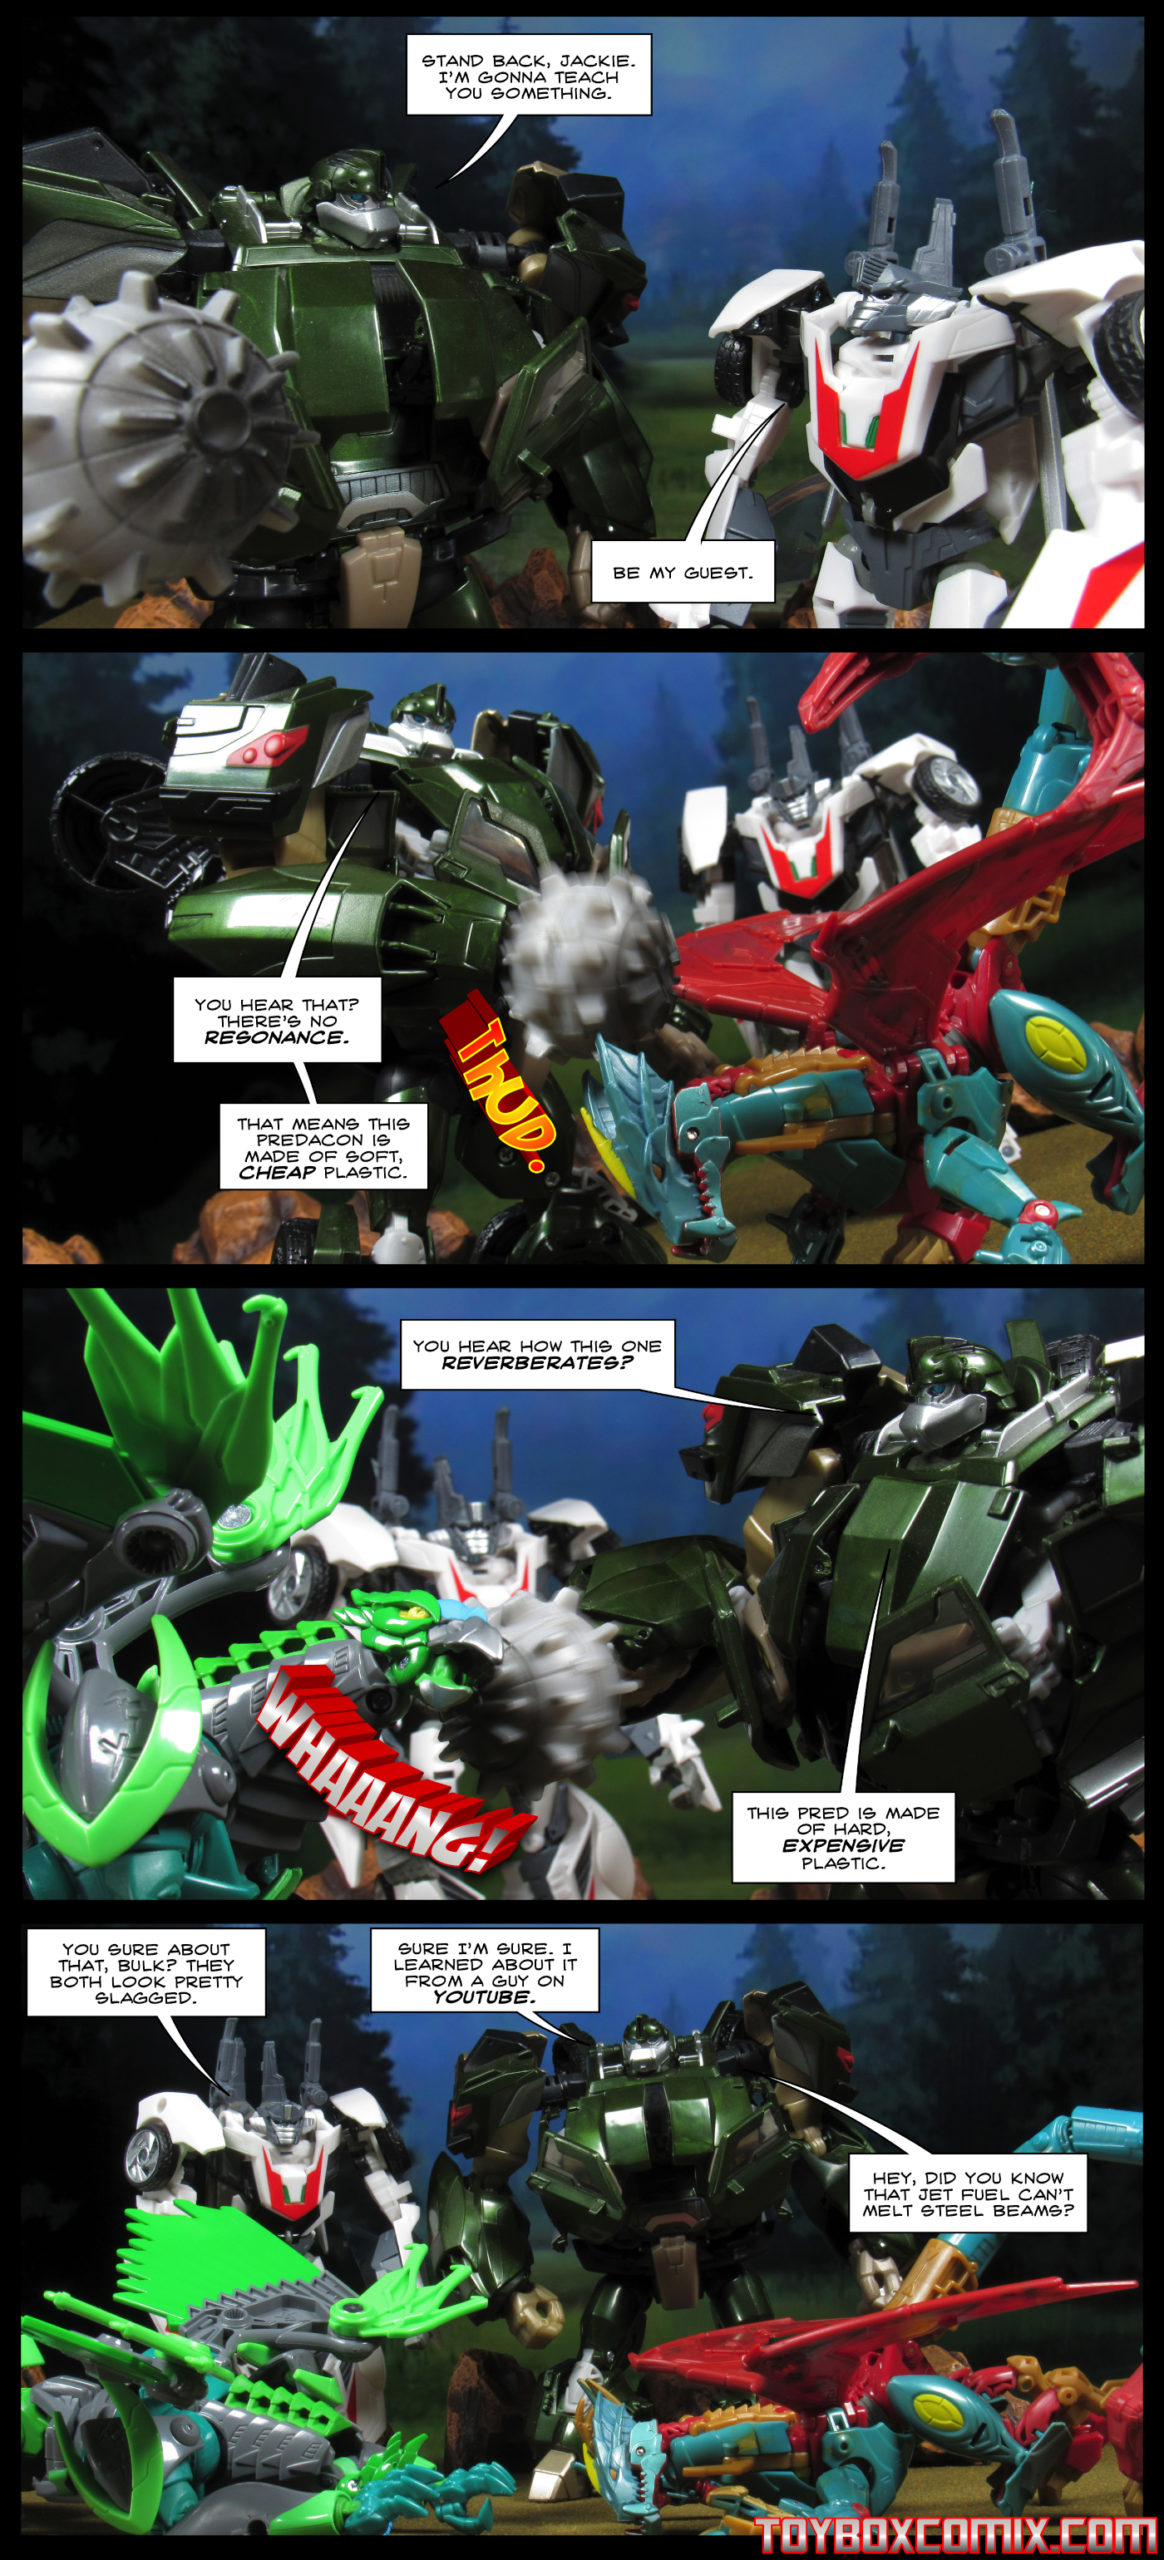 First panel: Bulkhead to Wheeljack: “Stand back, Jackie. I’m gonna teach you something.” Wheeljack: “Be my guest.” Second panel: Bulkhead punches the Predacon Ripclaw. “You hear that? There’s no resonance. That means this Predacon is made of soft, cheap plastic.” Third panel: Bulkhead punches the Predacon Grimwing. “You hear how this one reverberates? This Pred is made of hard, expensive plastic.” Fourth panel: Both Predacons lie in the foreground. Wheeljack: “You sure about that, Bulk? They both look pretty slagged.” Bulkhead: “Sure I’m sure. I learned about it from a guy you YouTube. Hey, did you know that jet fuel can’t melt steel beams?”